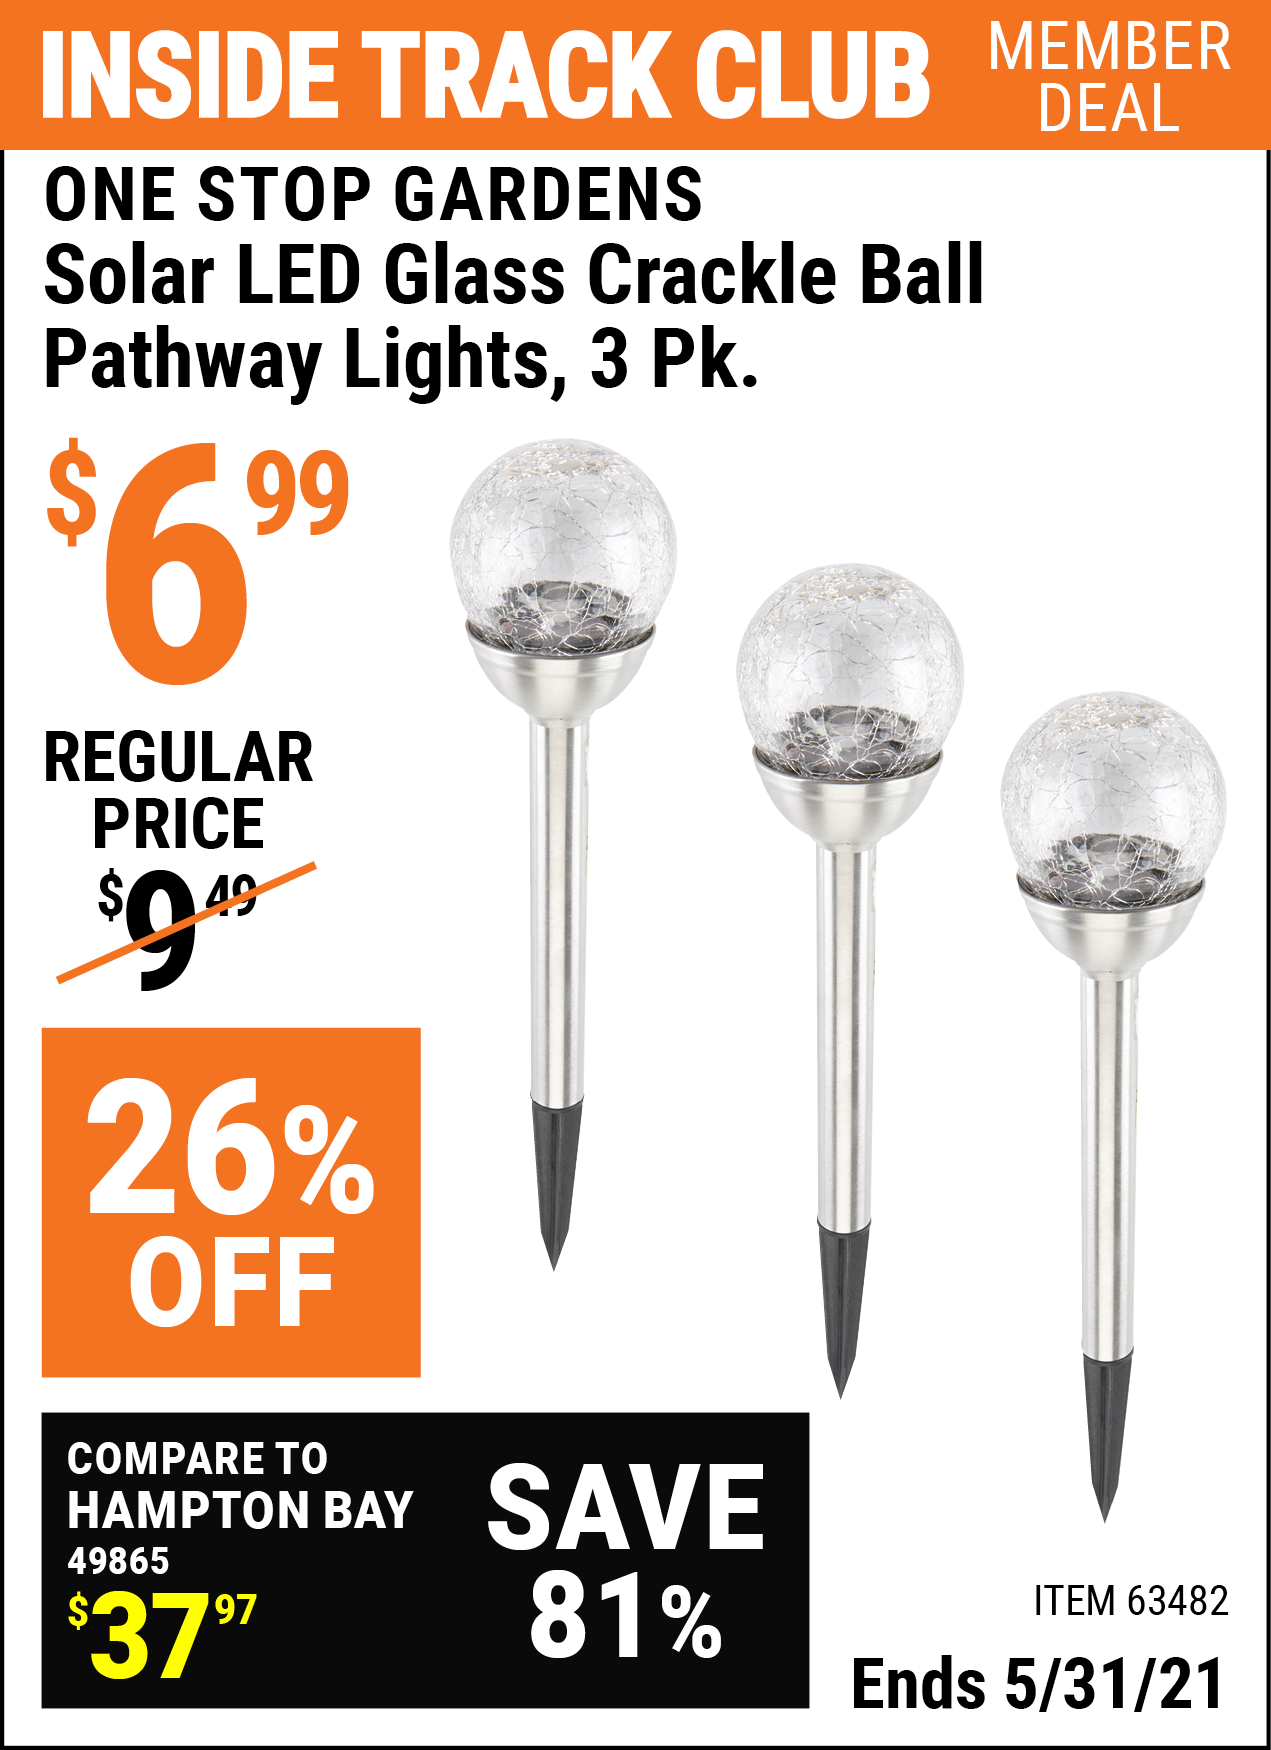 Inside Track Club members can buy the ONE STOP GARDENS 3 Piece Solar Glass Crackle Ball Pathway Light Set (Item 63482) for $6.99, valid through 5/31/2021.